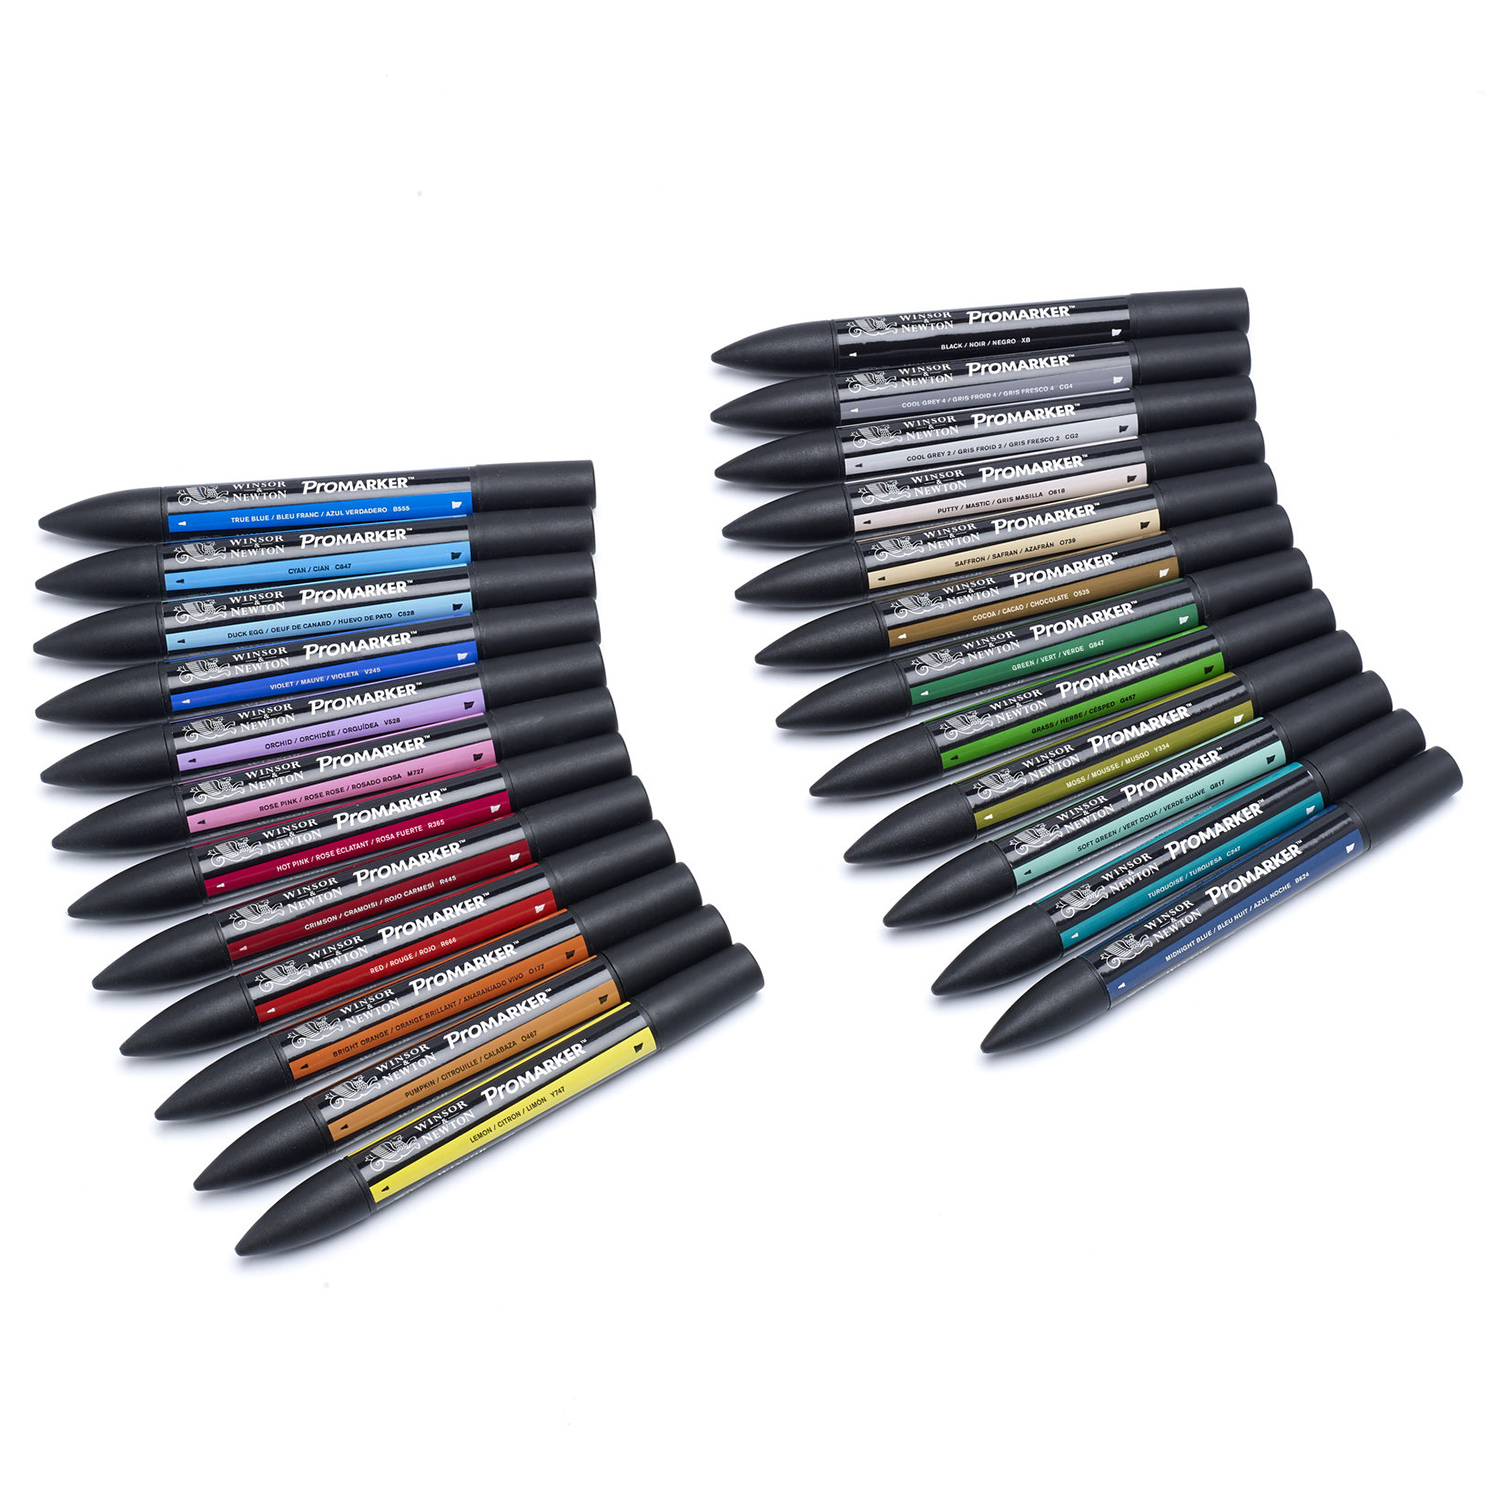 Winsor and Newton Marker Pen 25 Pack Image 4